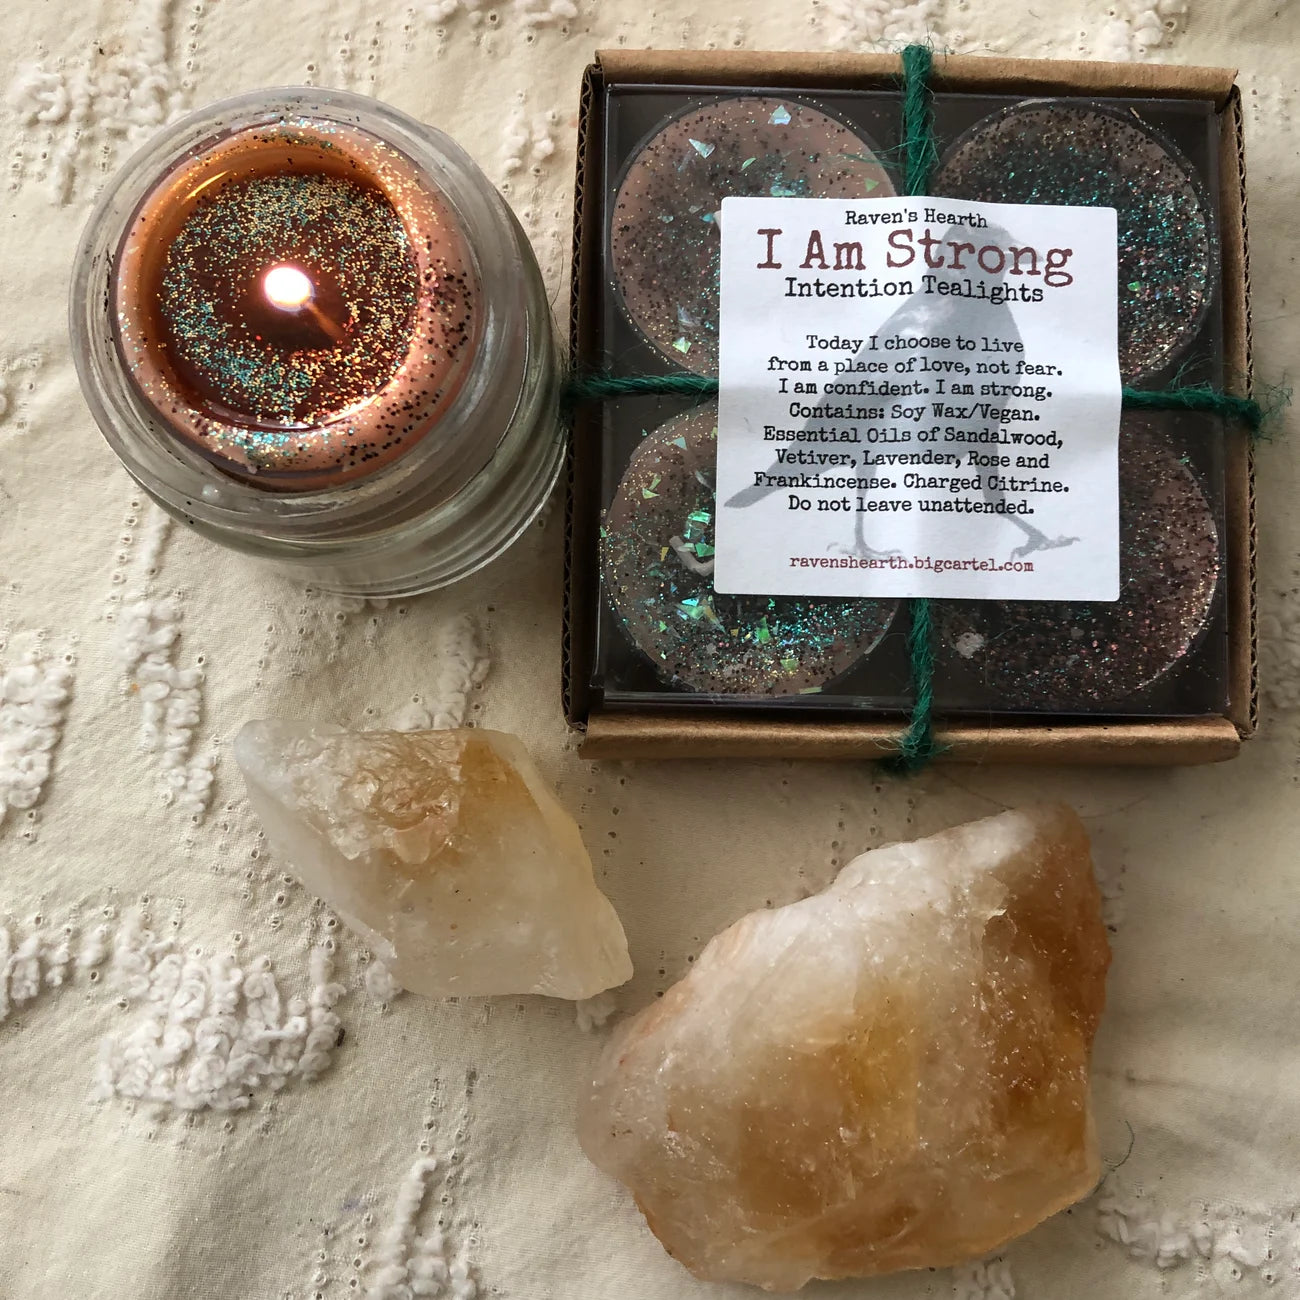 I AM STRONG Meditation Tealight Candles by Raven’s Hearth